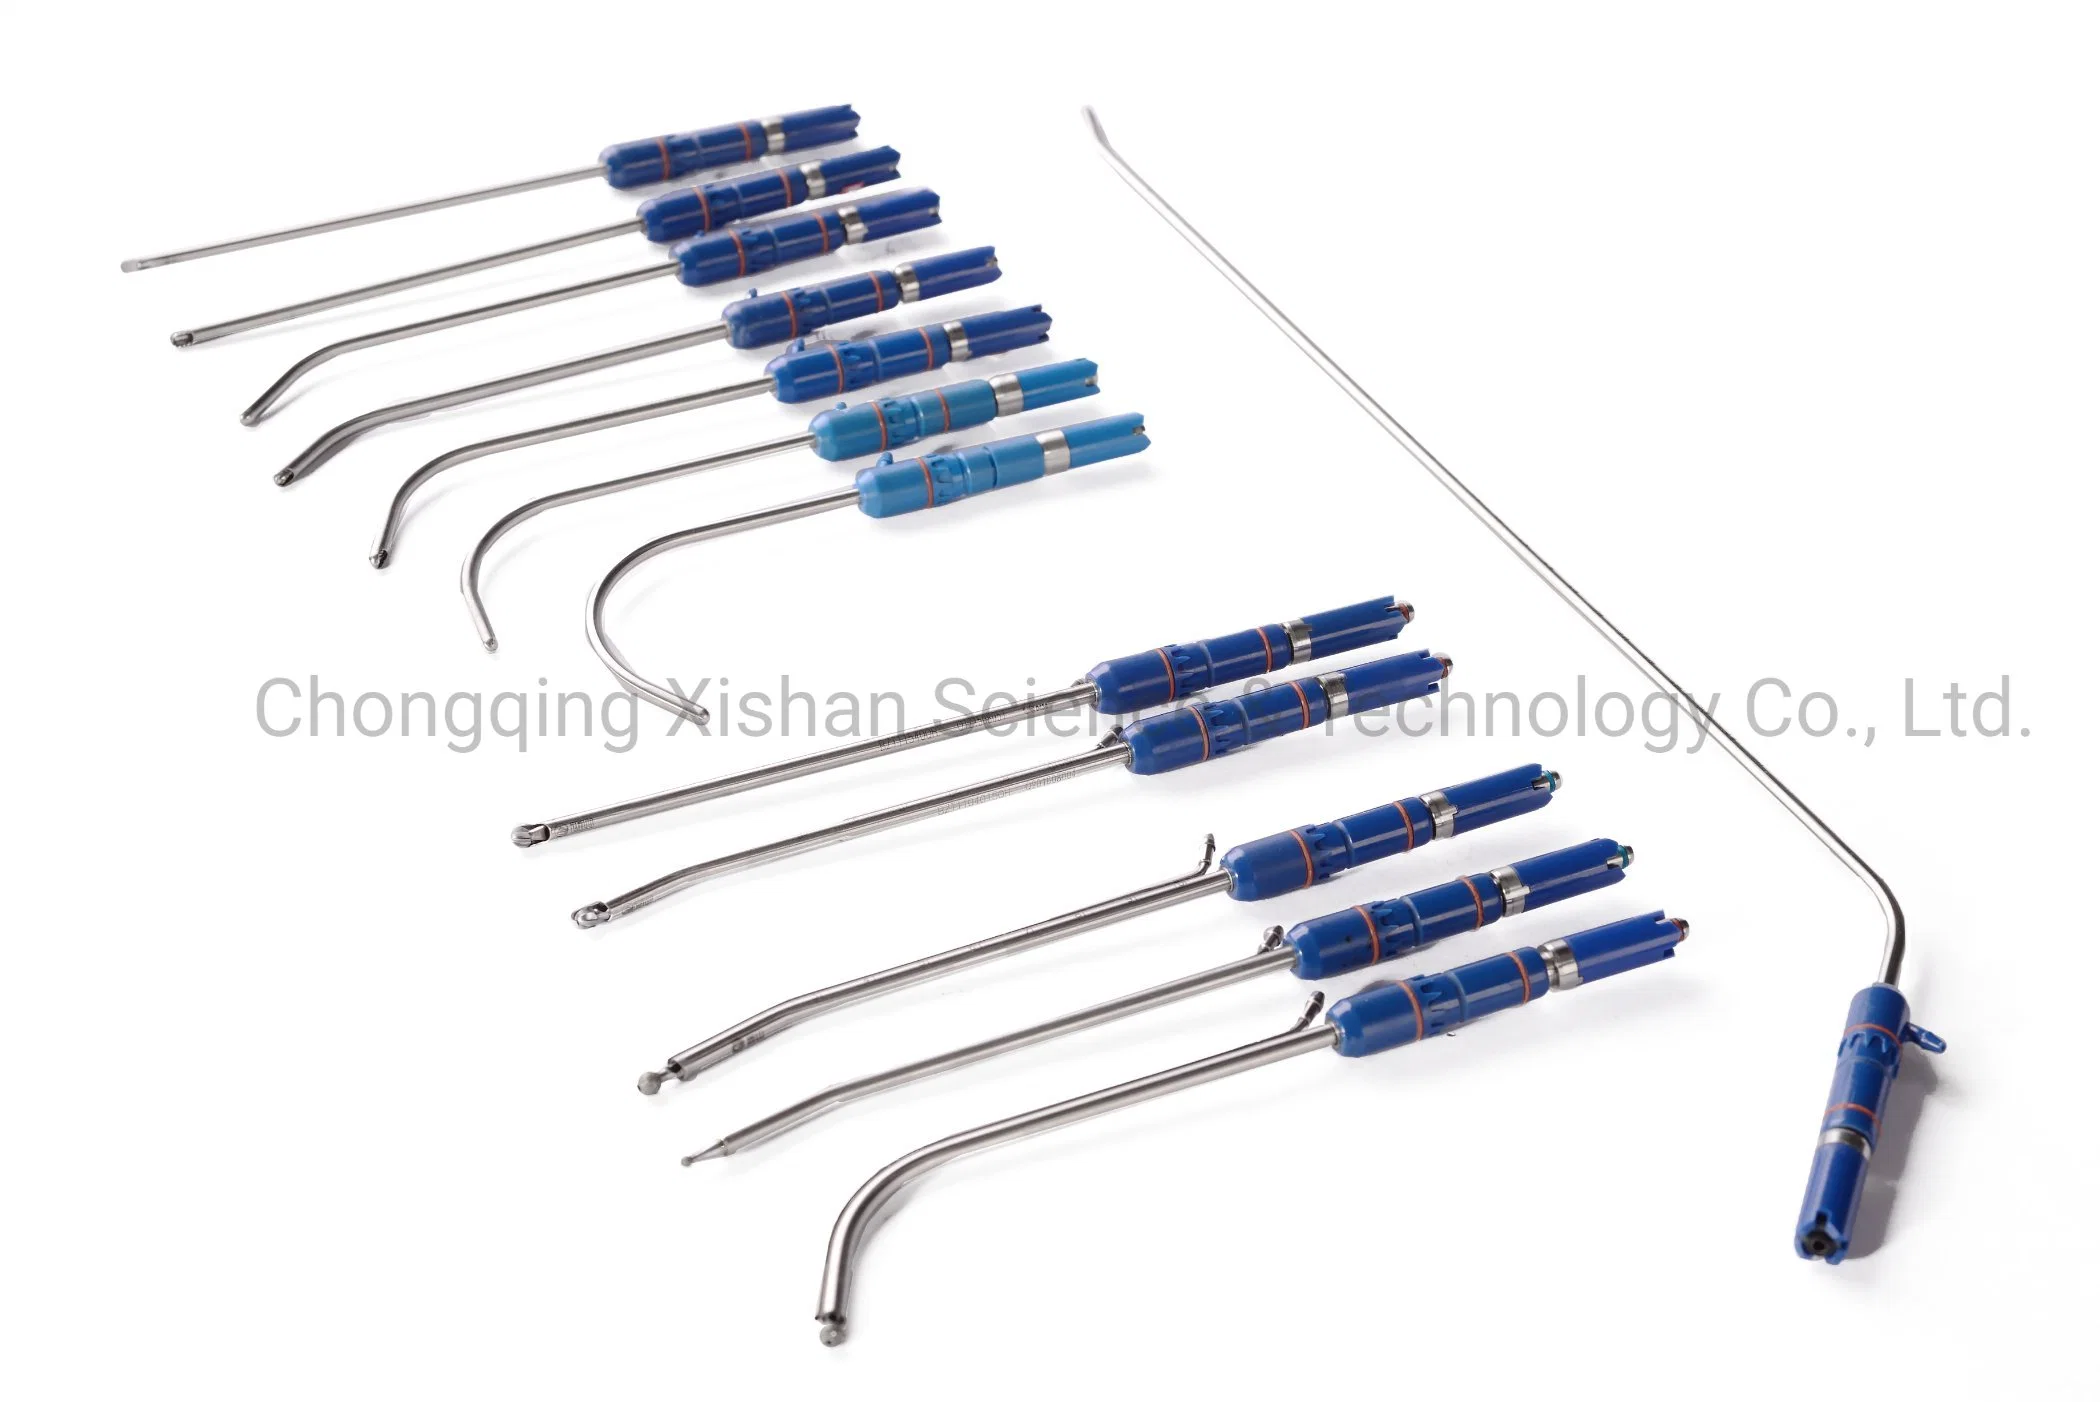 Surgical Power Tools for Ear/Nasal/Throat/ Ent/Surgical Debrider/Shaving Blade/ Surgical Bur / Ent Drill/Ent Shaver/Cutter